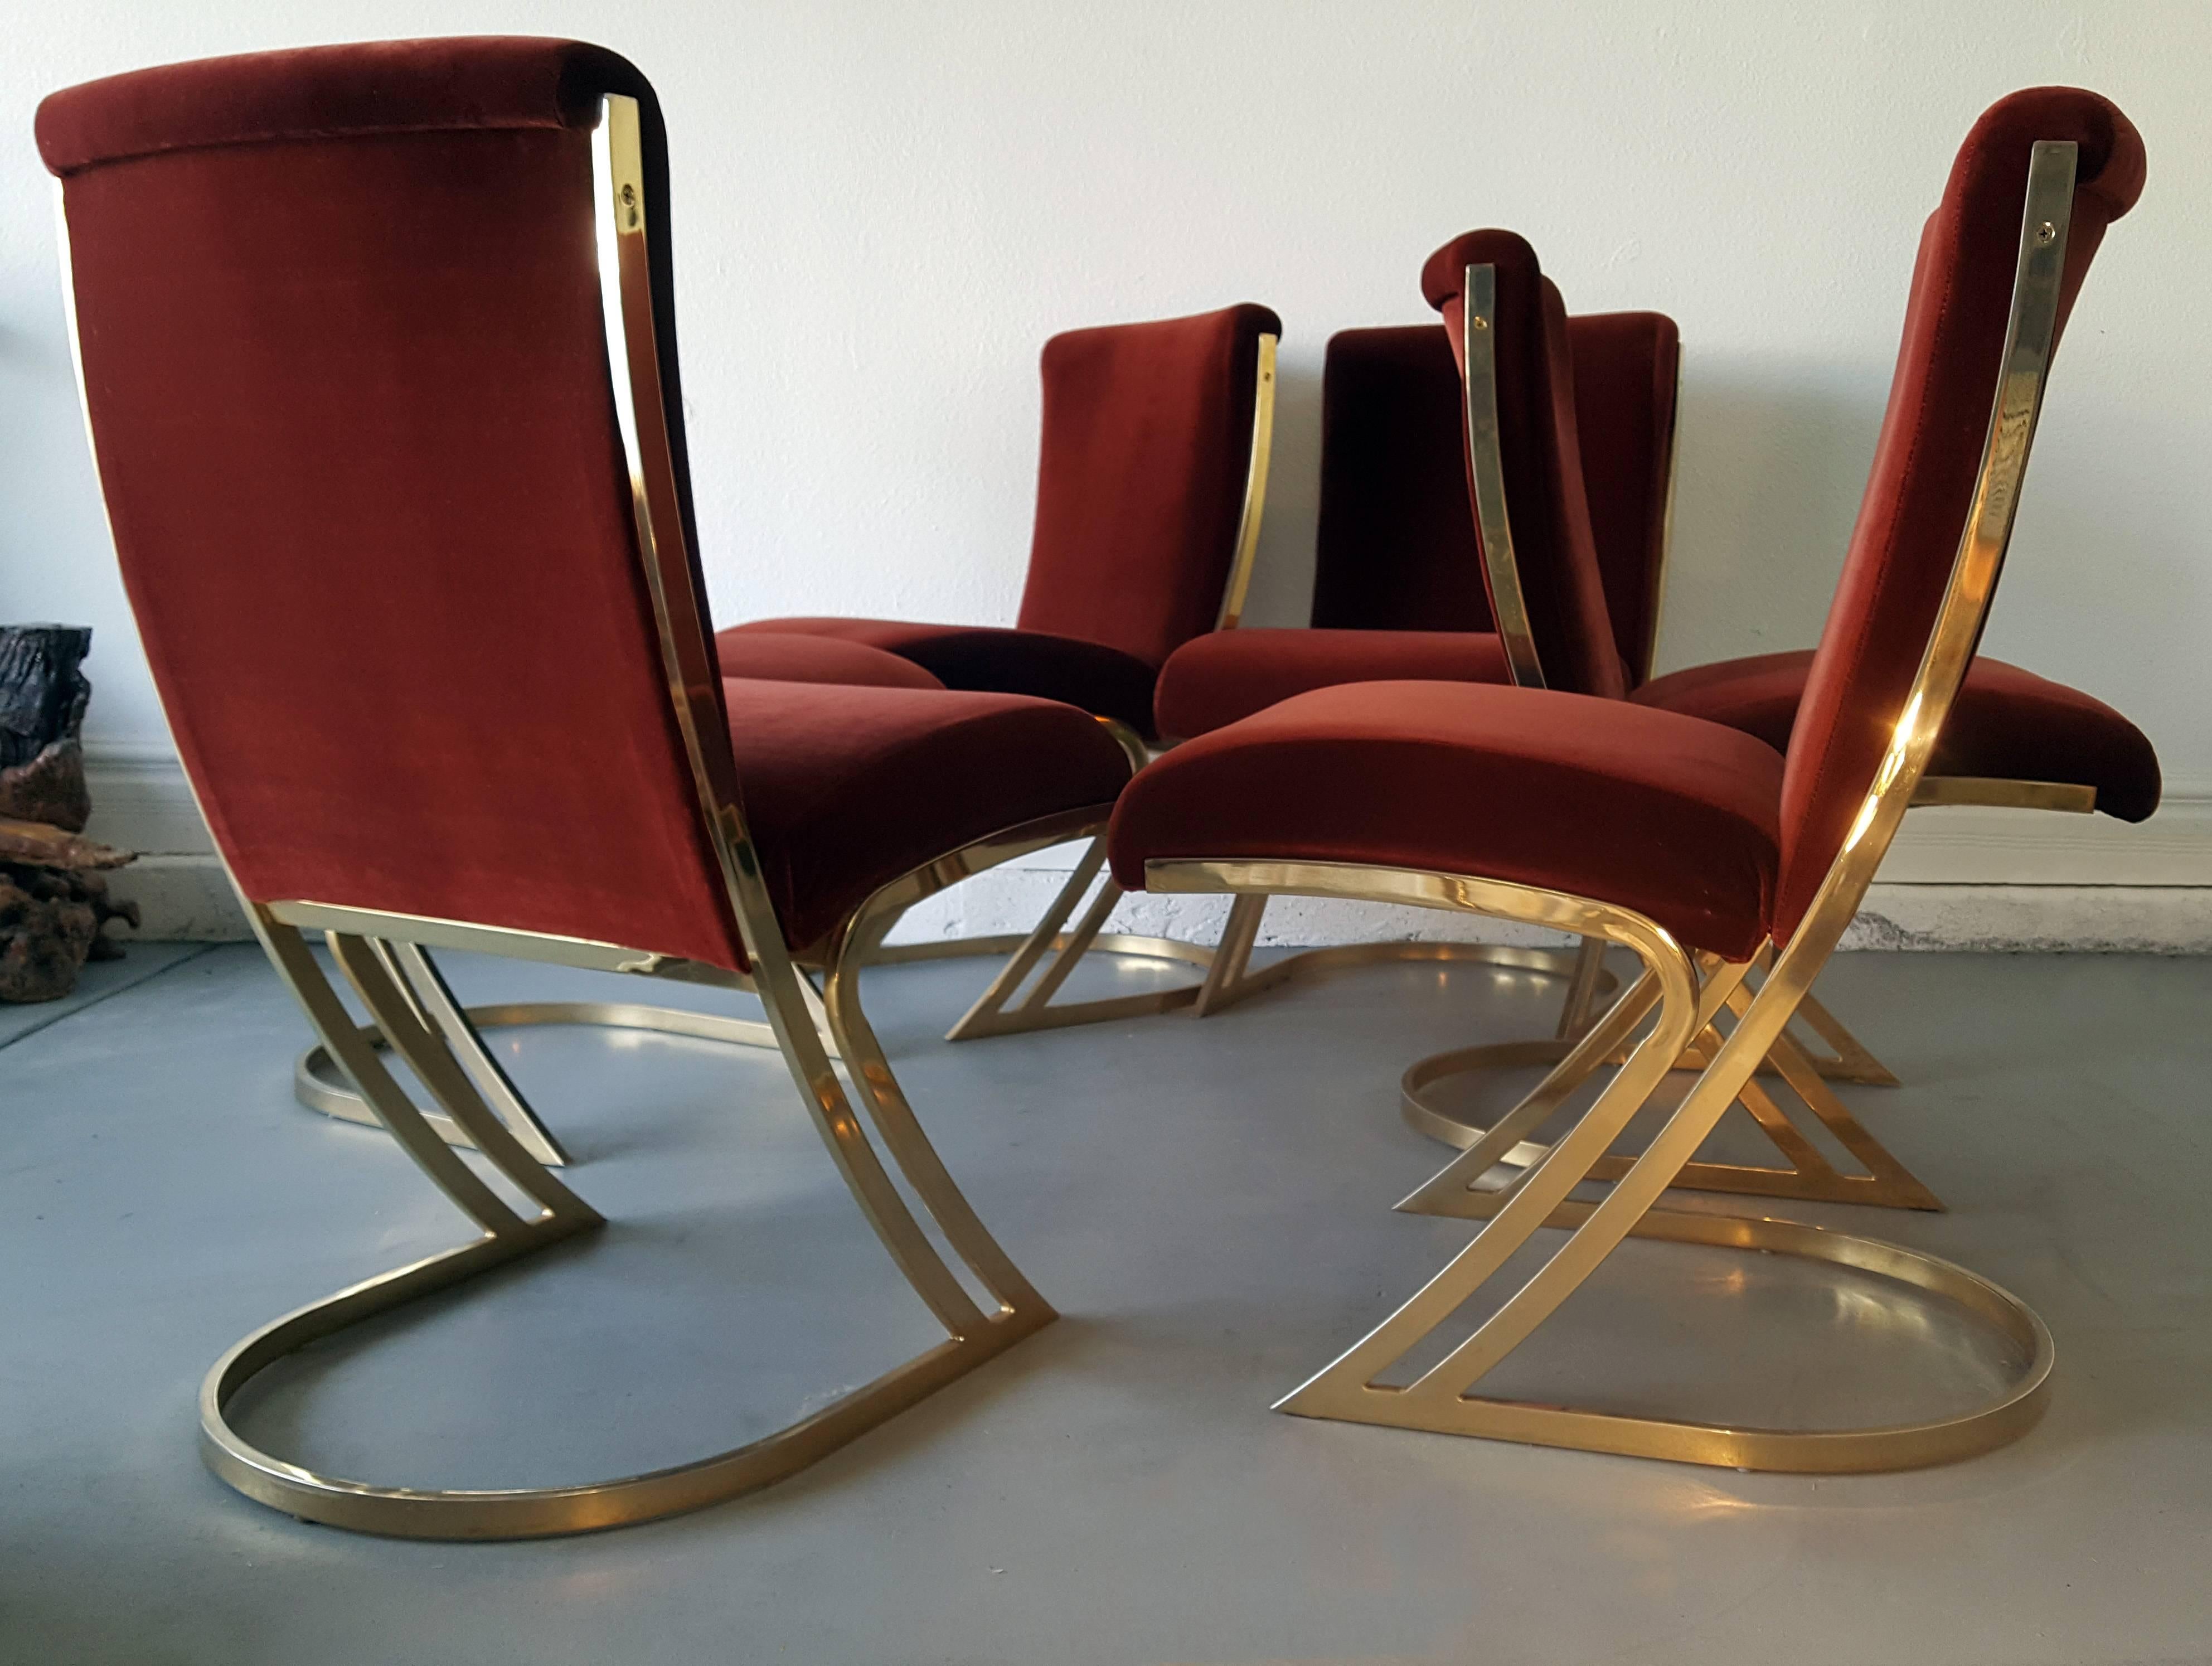 A stunning set of six Mid-Century Modern / Regency styled Pierre Cardin design, brass dining chairs upholstered in an oxblood colored velvet. In great condition with minimal wear to commensurate with age.